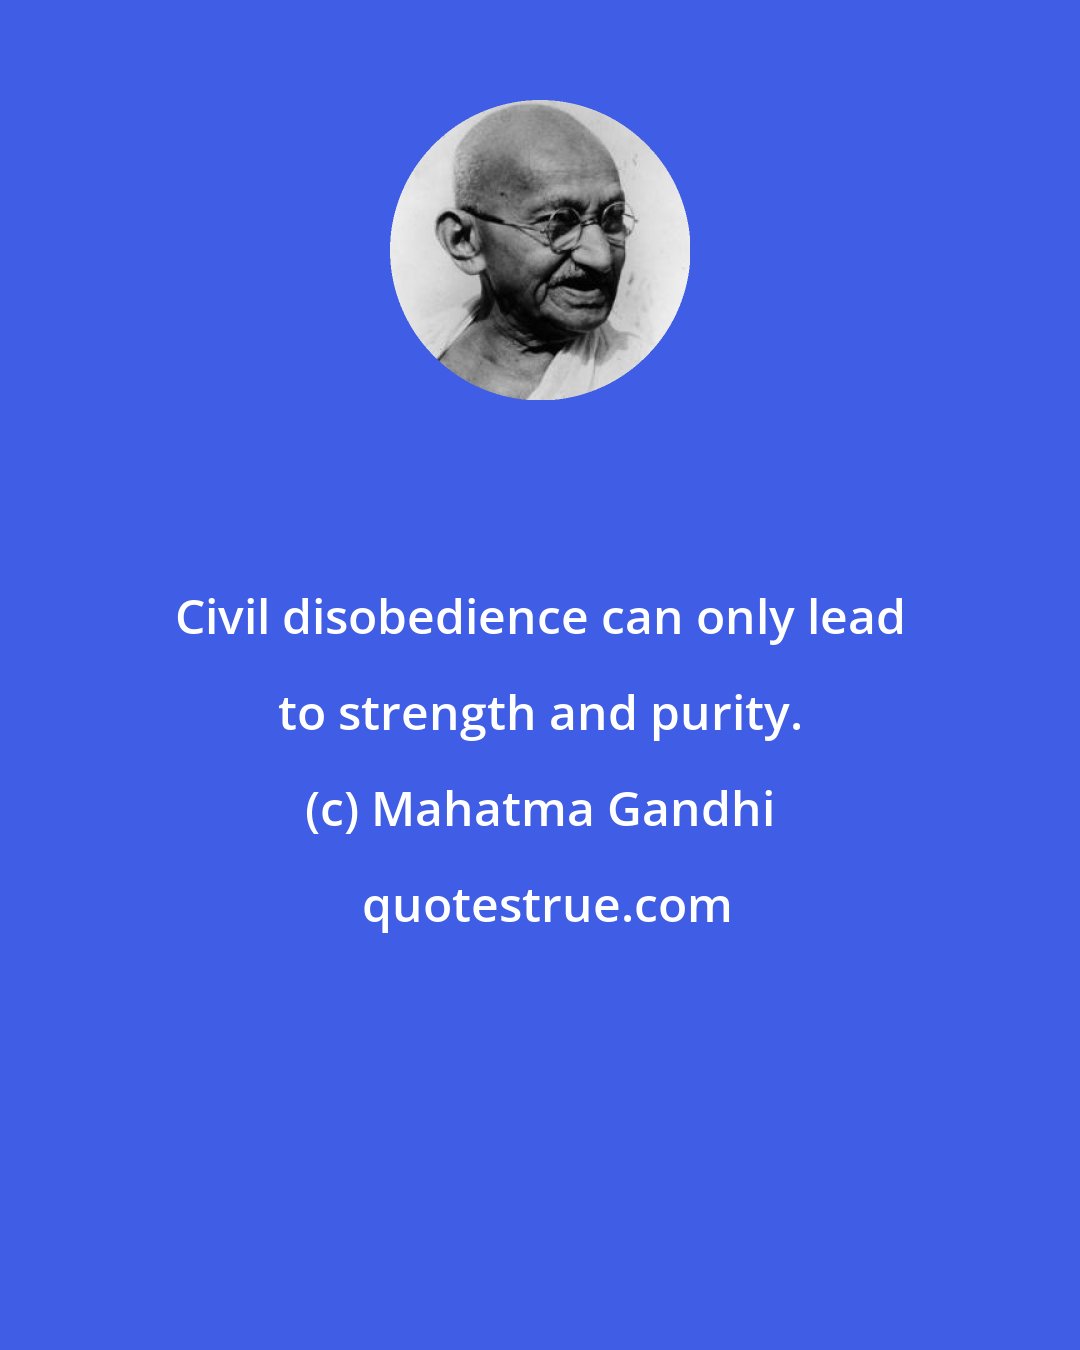 Mahatma Gandhi: Civil disobedience can only lead to strength and purity.